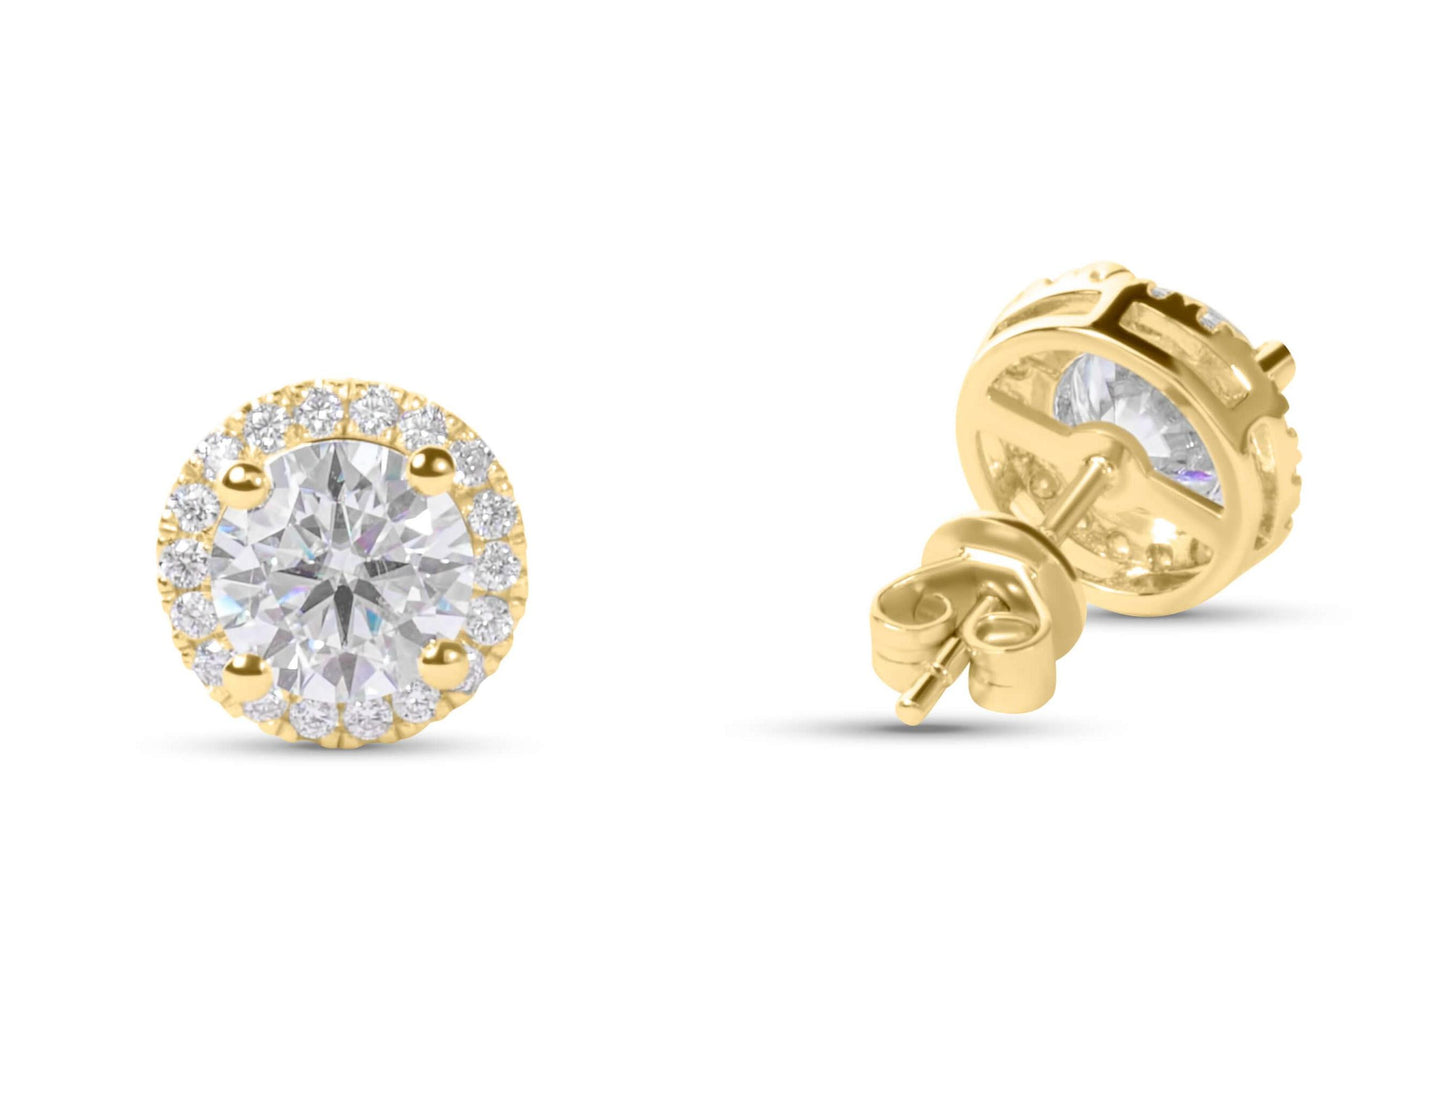 Moissanite Diamond Gold Earrings with Surrounding small stones on white background